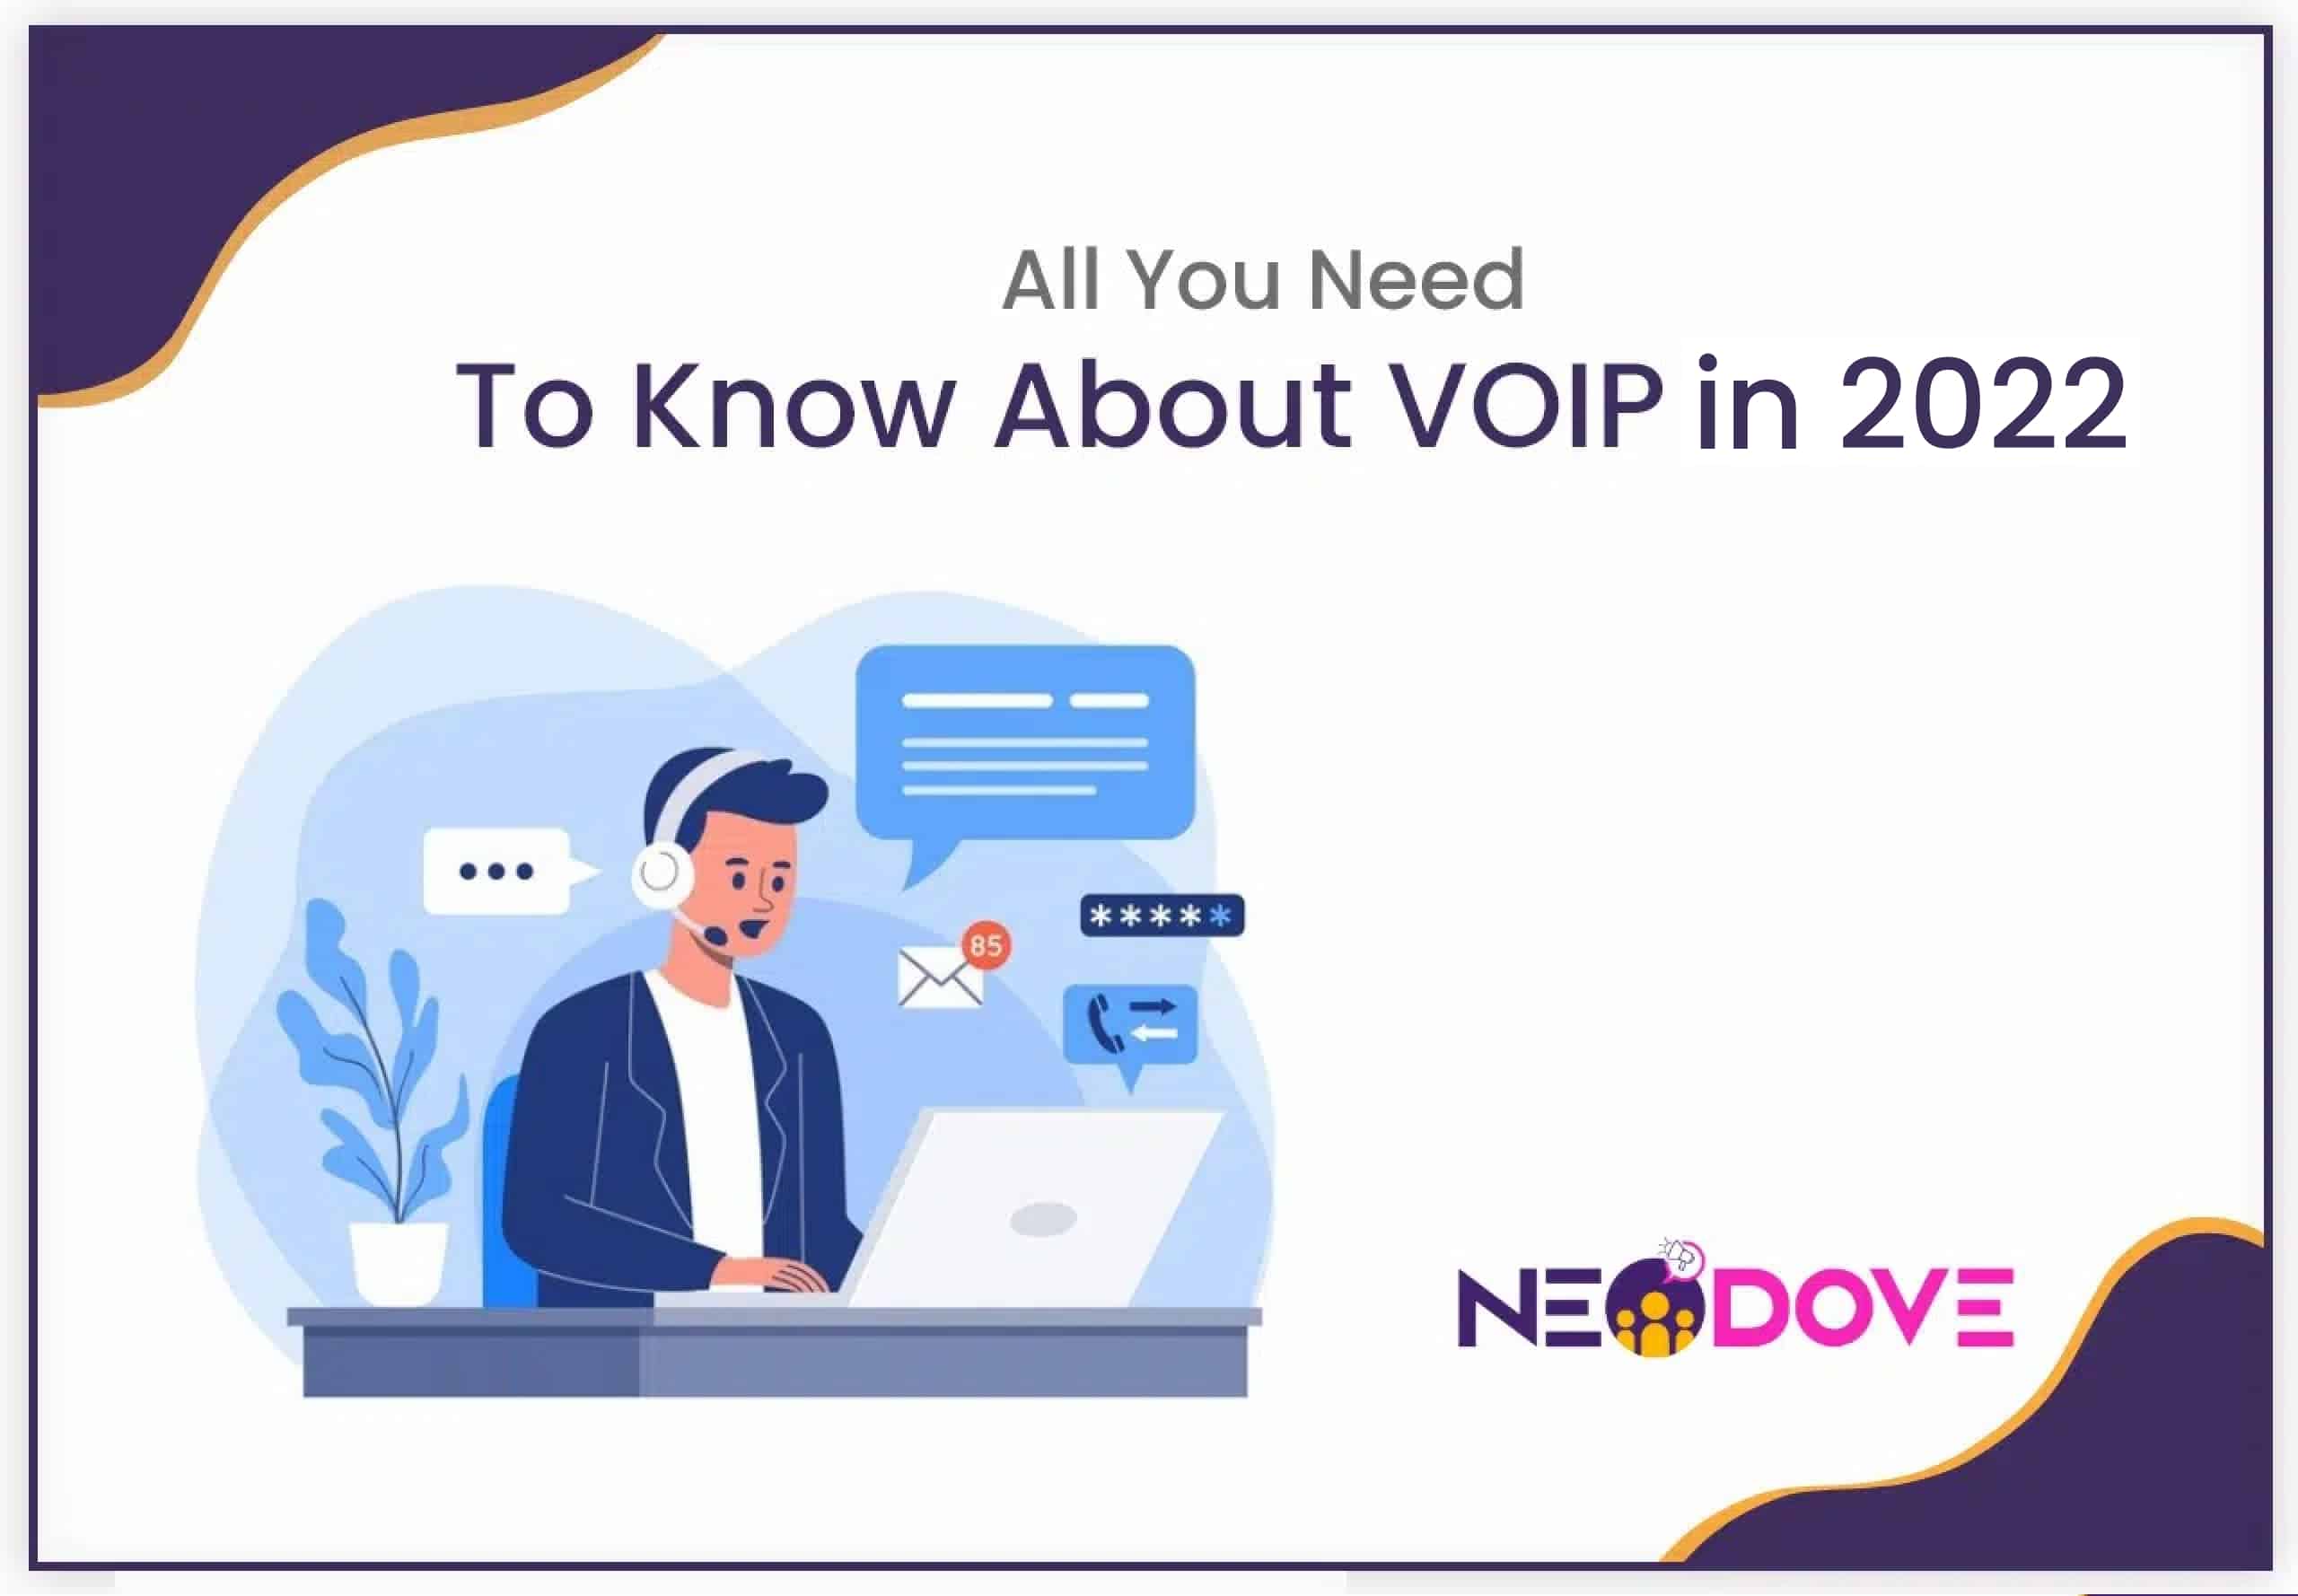 All you need to know about VOIP in 2022